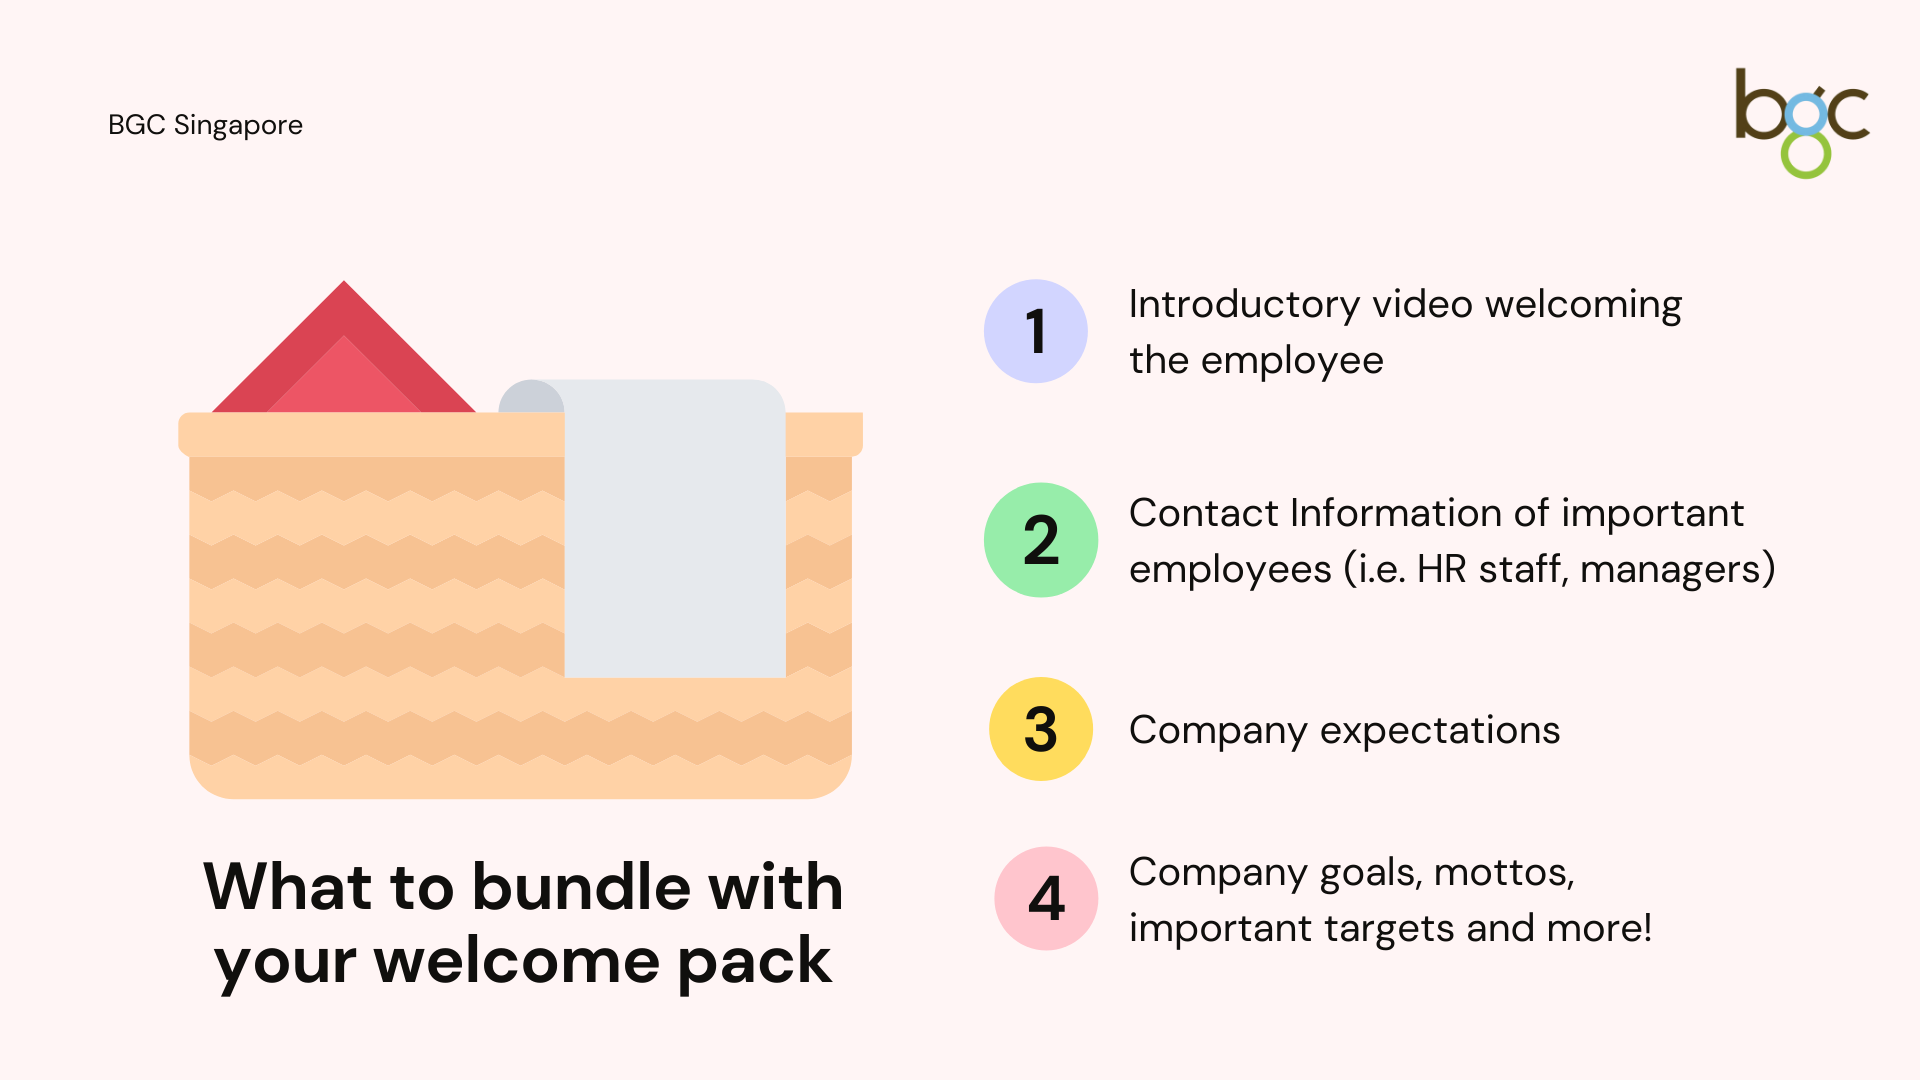 hr-welcome-pack-malaysia-ideas.png